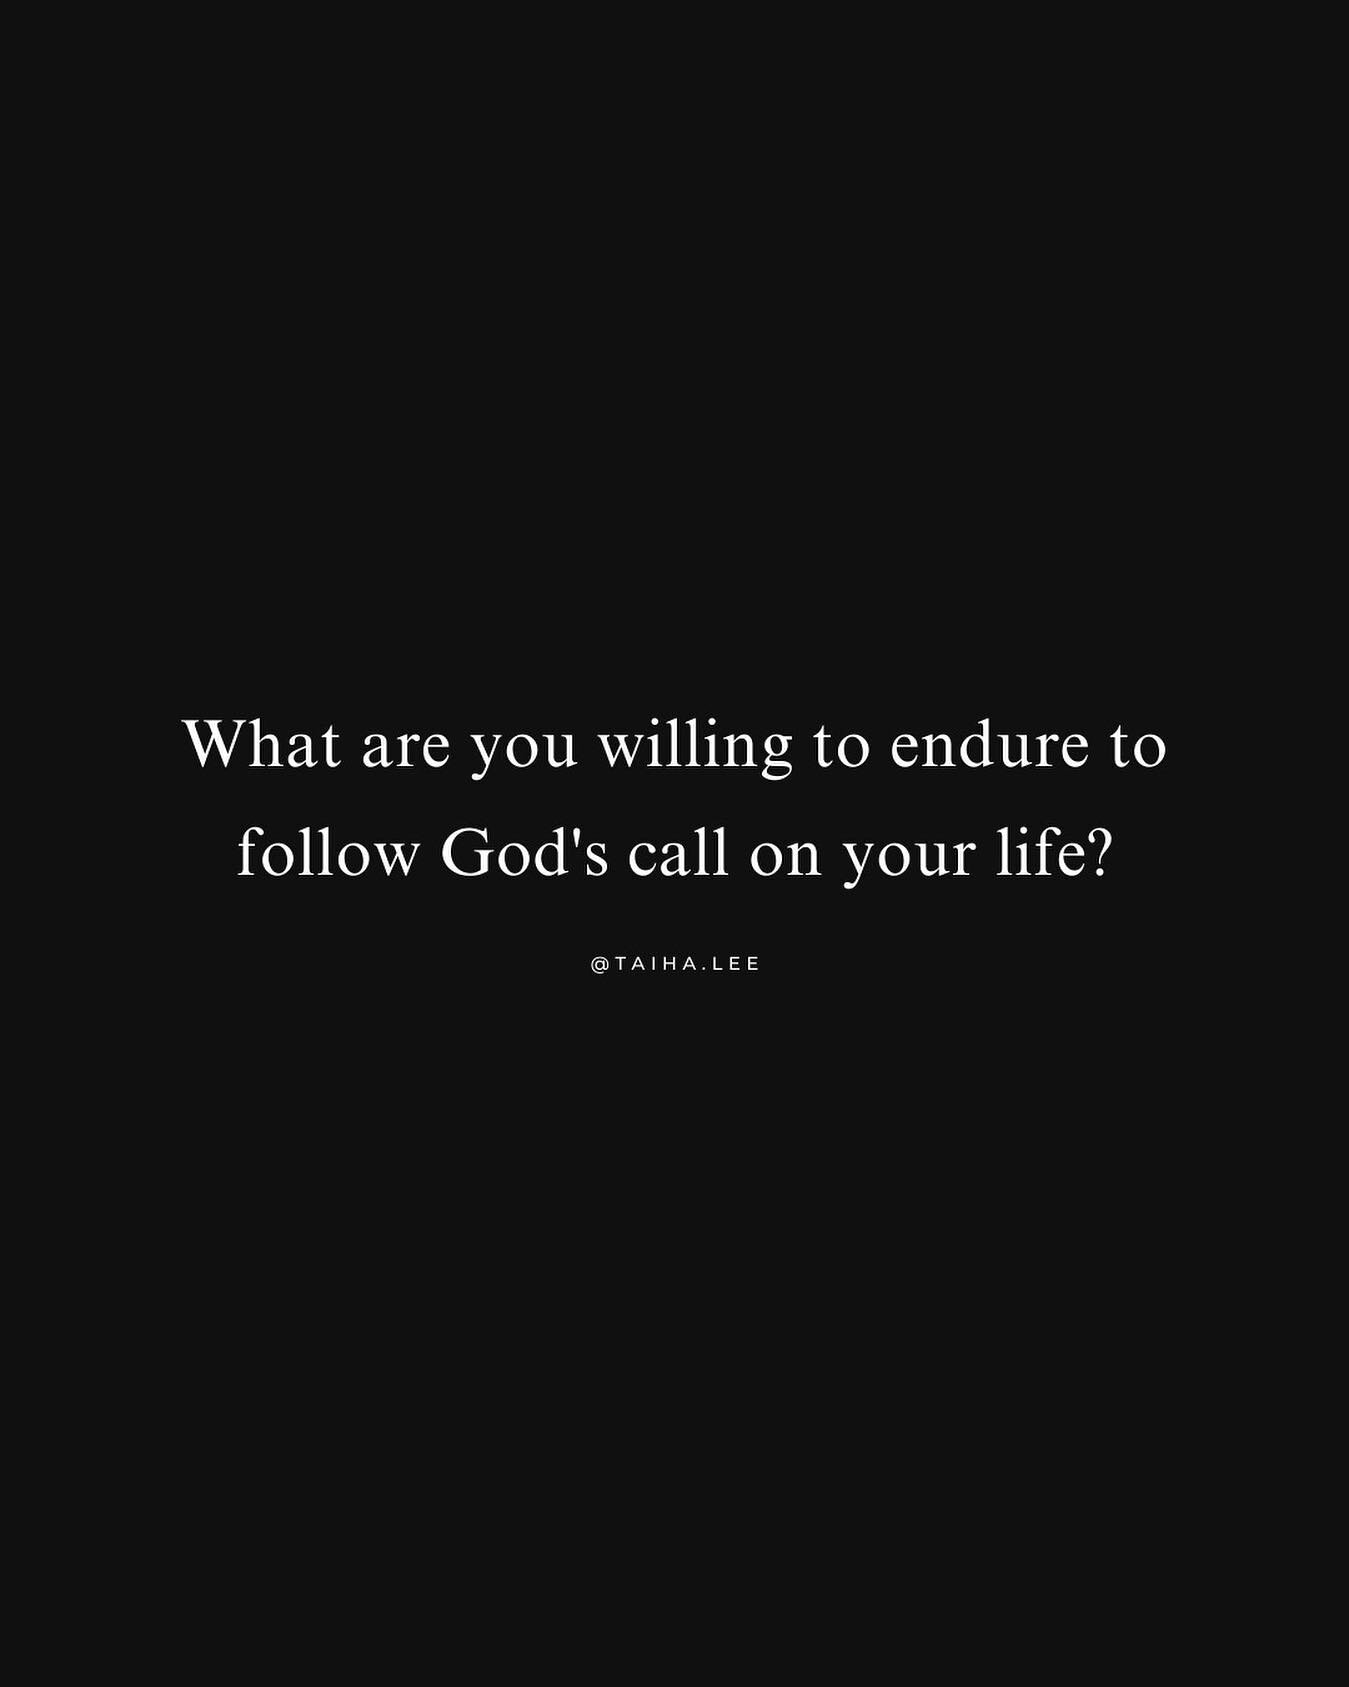 What are you willing to endure to follow God's call on your life?
⠀⠀⠀⠀⠀⠀⠀⠀⠀
Taiha Lee